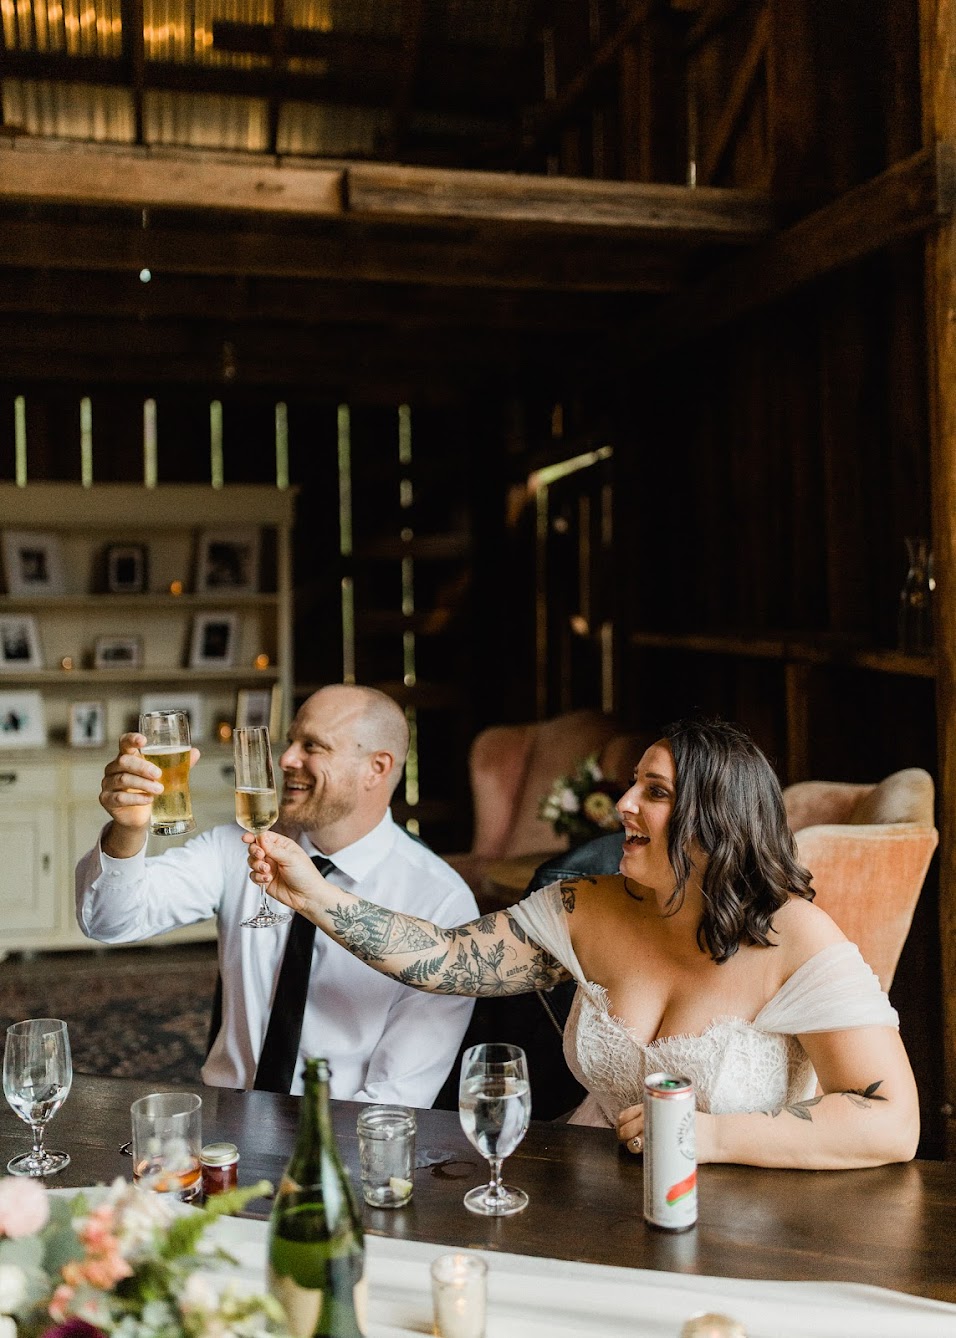 The couple sitting at their table holding up and cheering with a glass of beer and  Champagne.